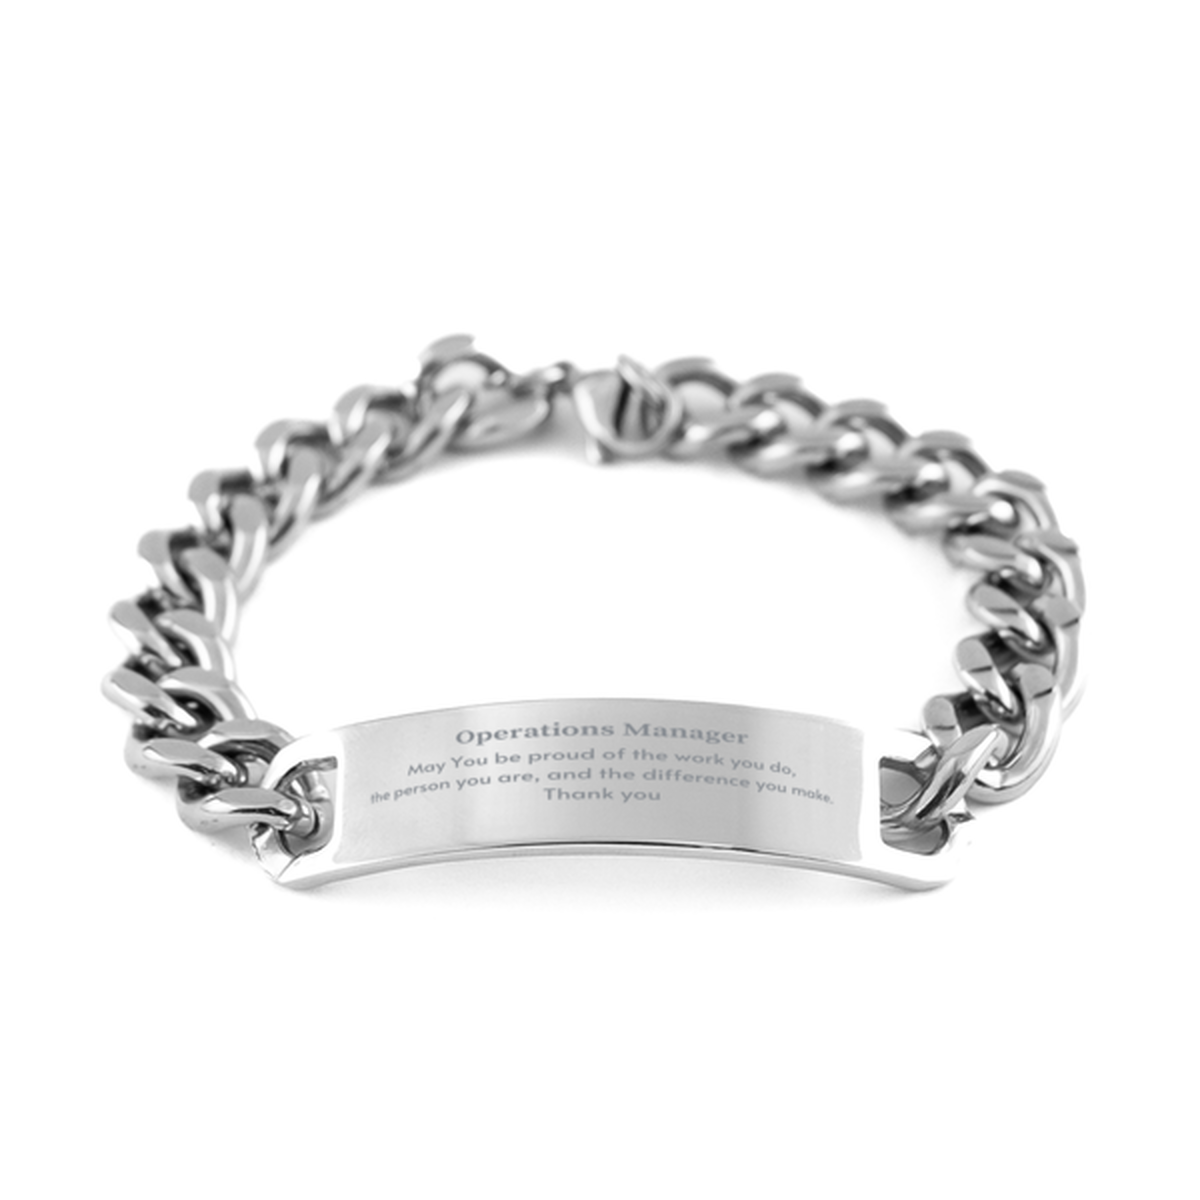 Heartwarming Cuban Chain Stainless Steel Bracelet Retirement Coworkers Gifts for Operations Manager, Operations Manager May You be proud of the work you do, the person you are Gifts for Boss Men Women Friends